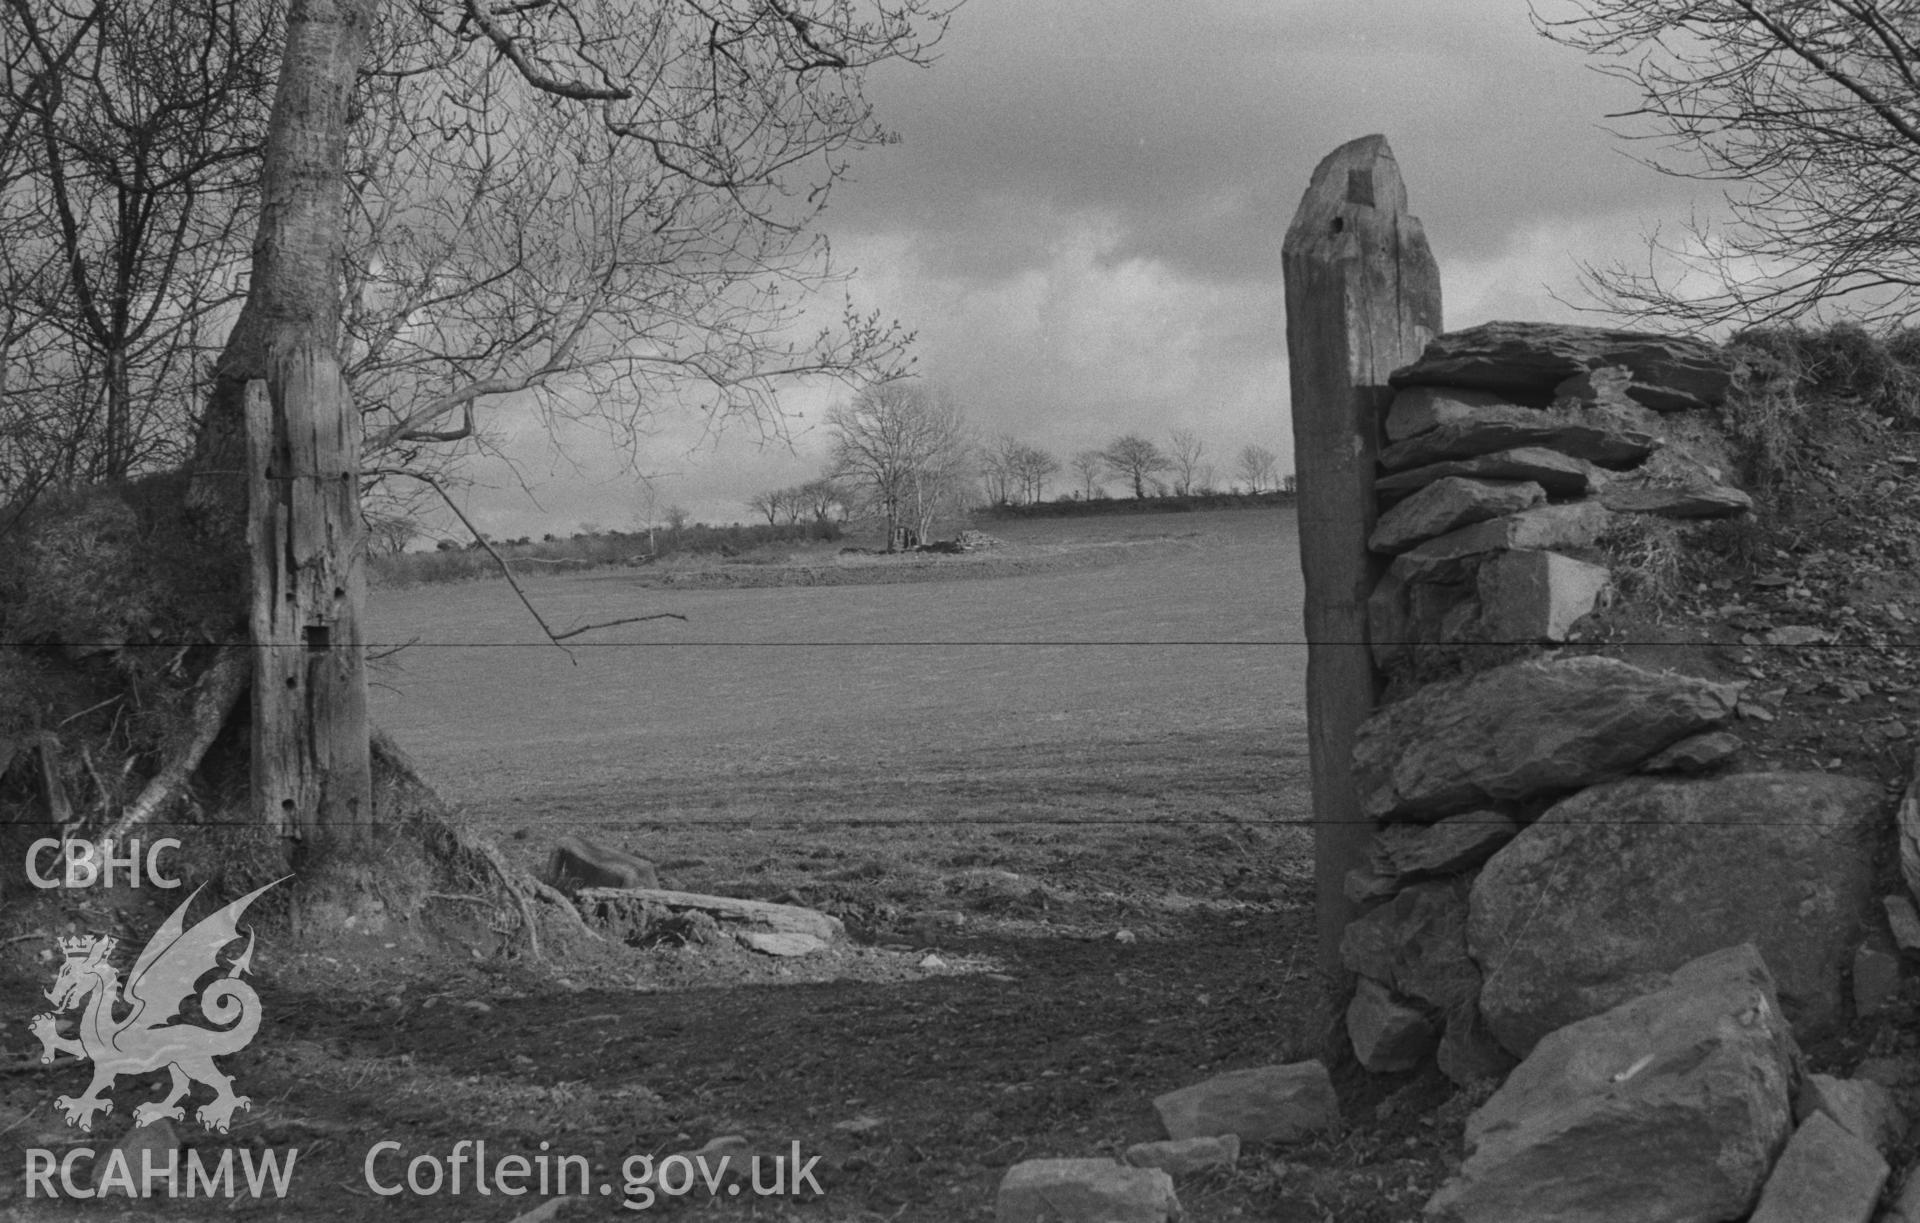 Digital copy of a black and white negative showing site of St Mary's church, Llanfair Trefhelygen. Photographed in April 1963 by Arthur O. Chater from Grid Reference SN 3423 4424, looking south east.